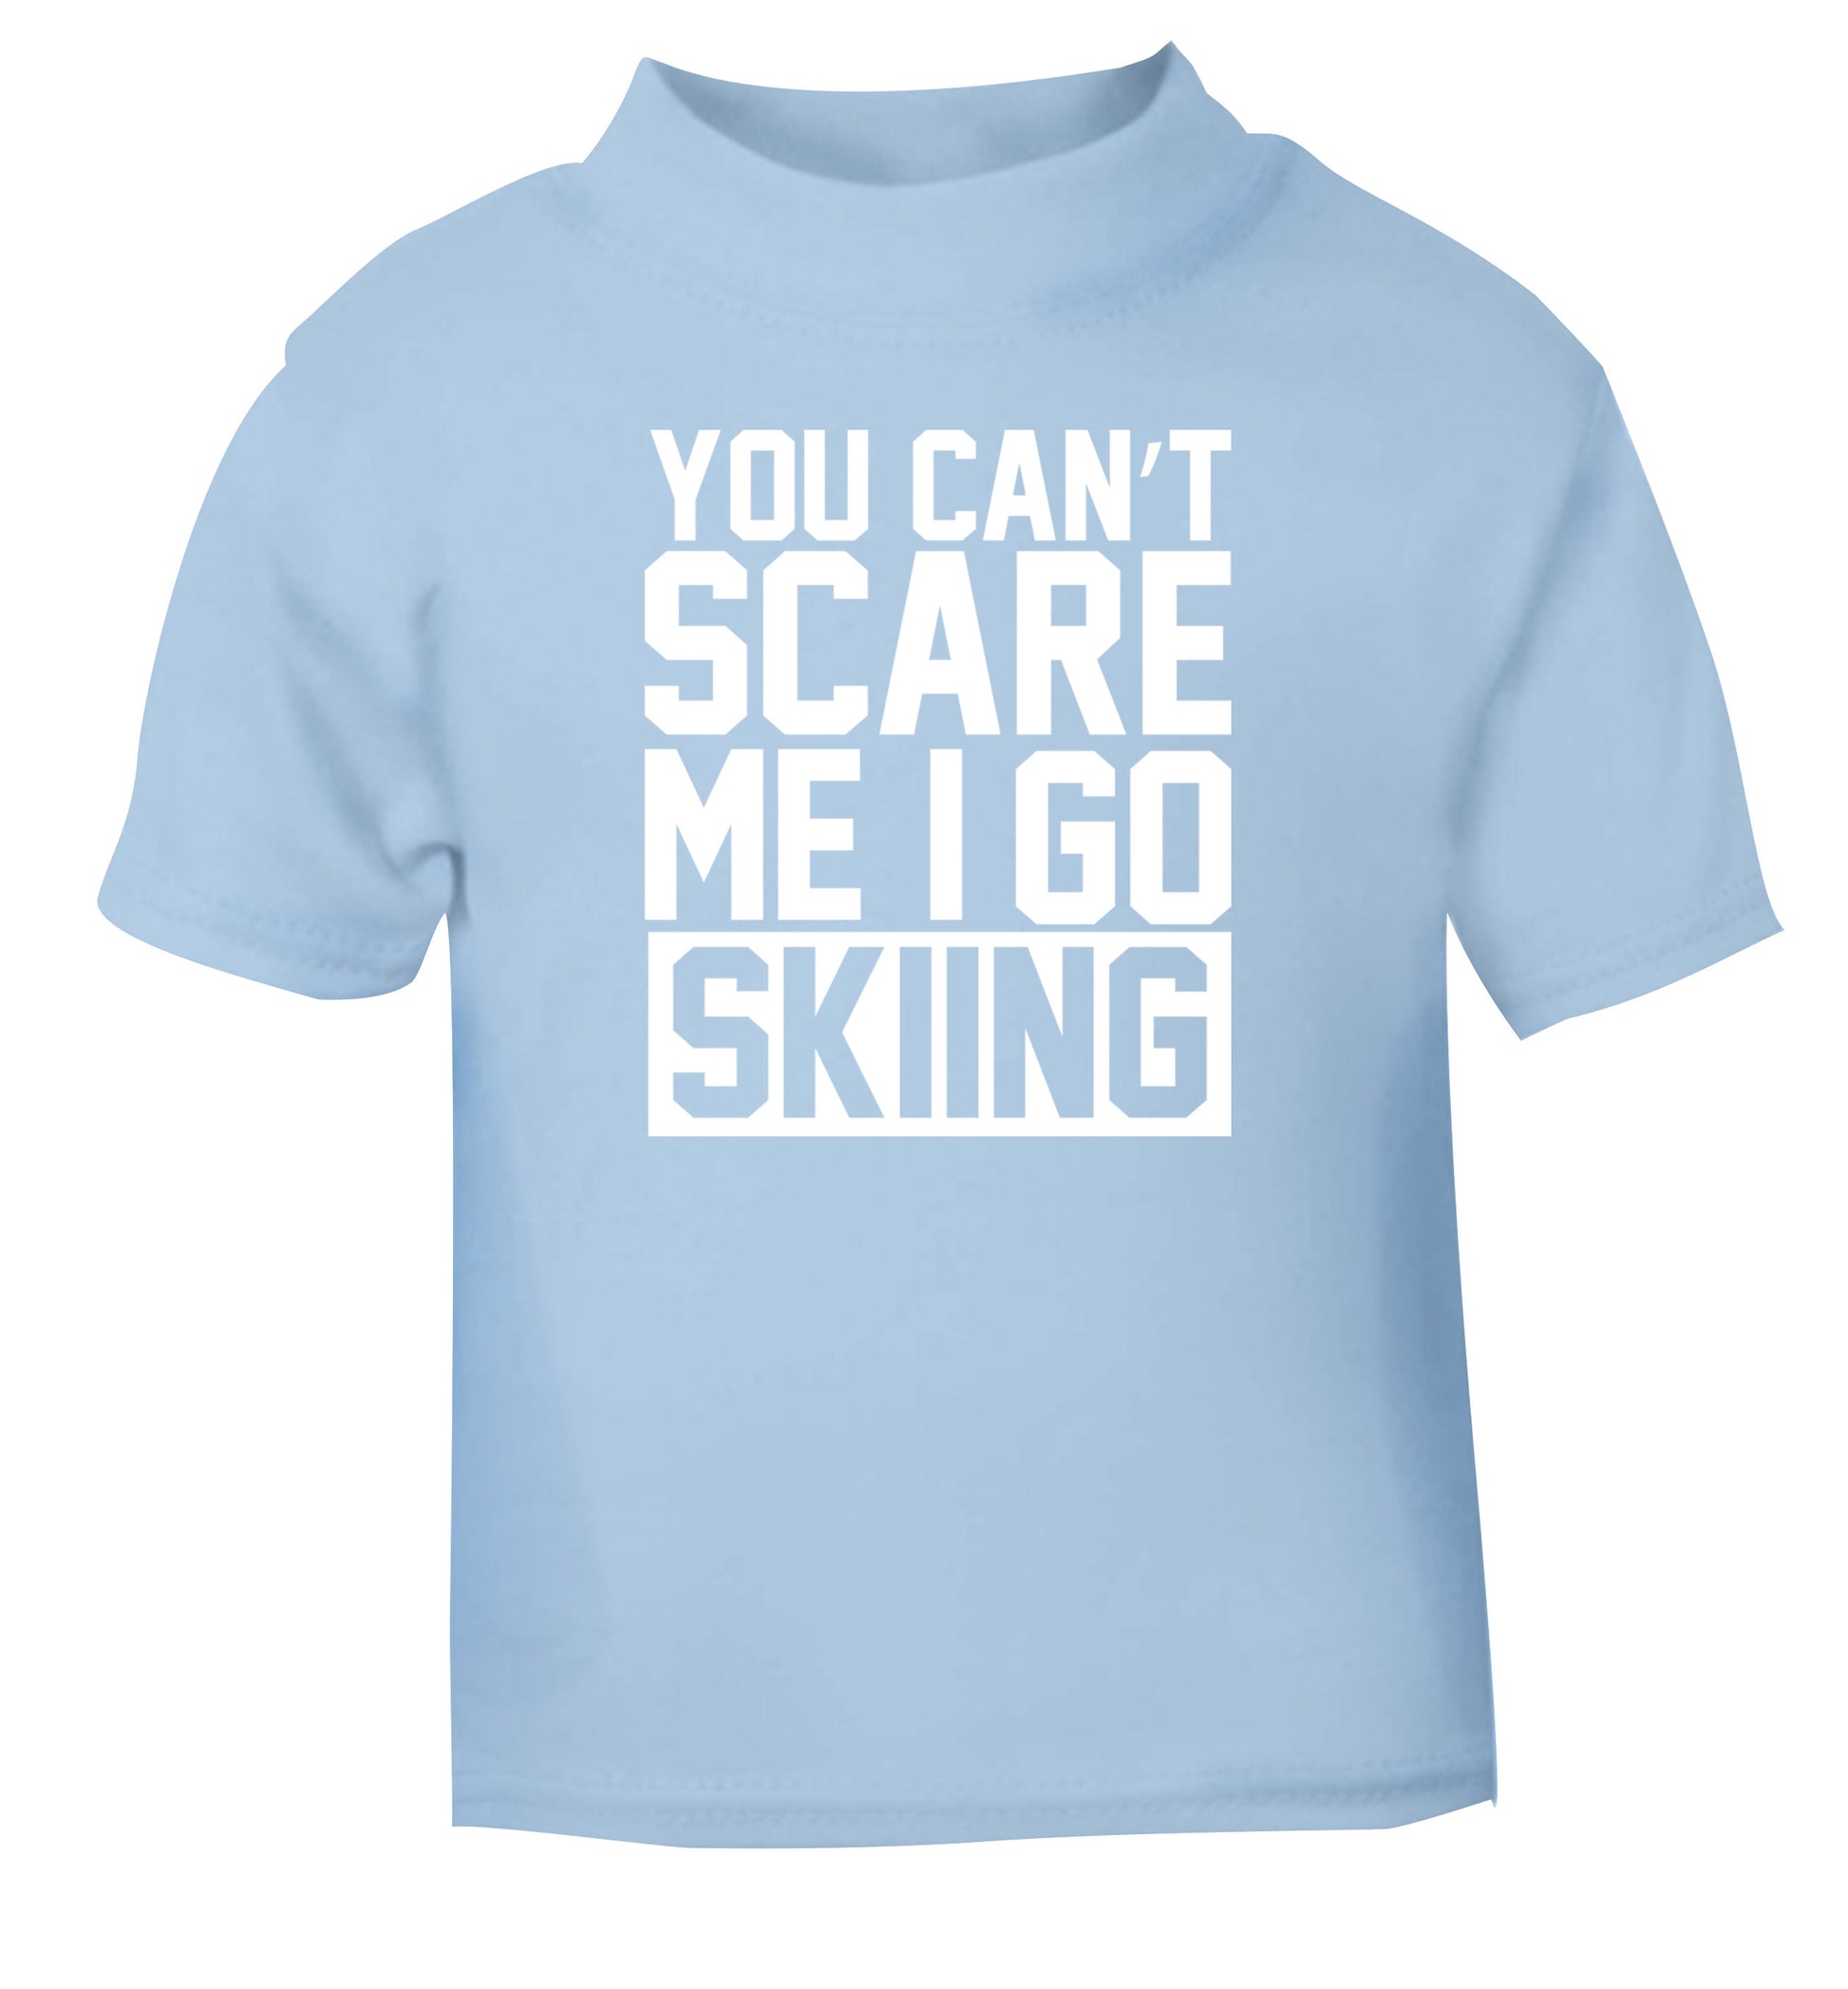 You can't scare me I go skiing light blue Baby Toddler Tshirt 2 Years